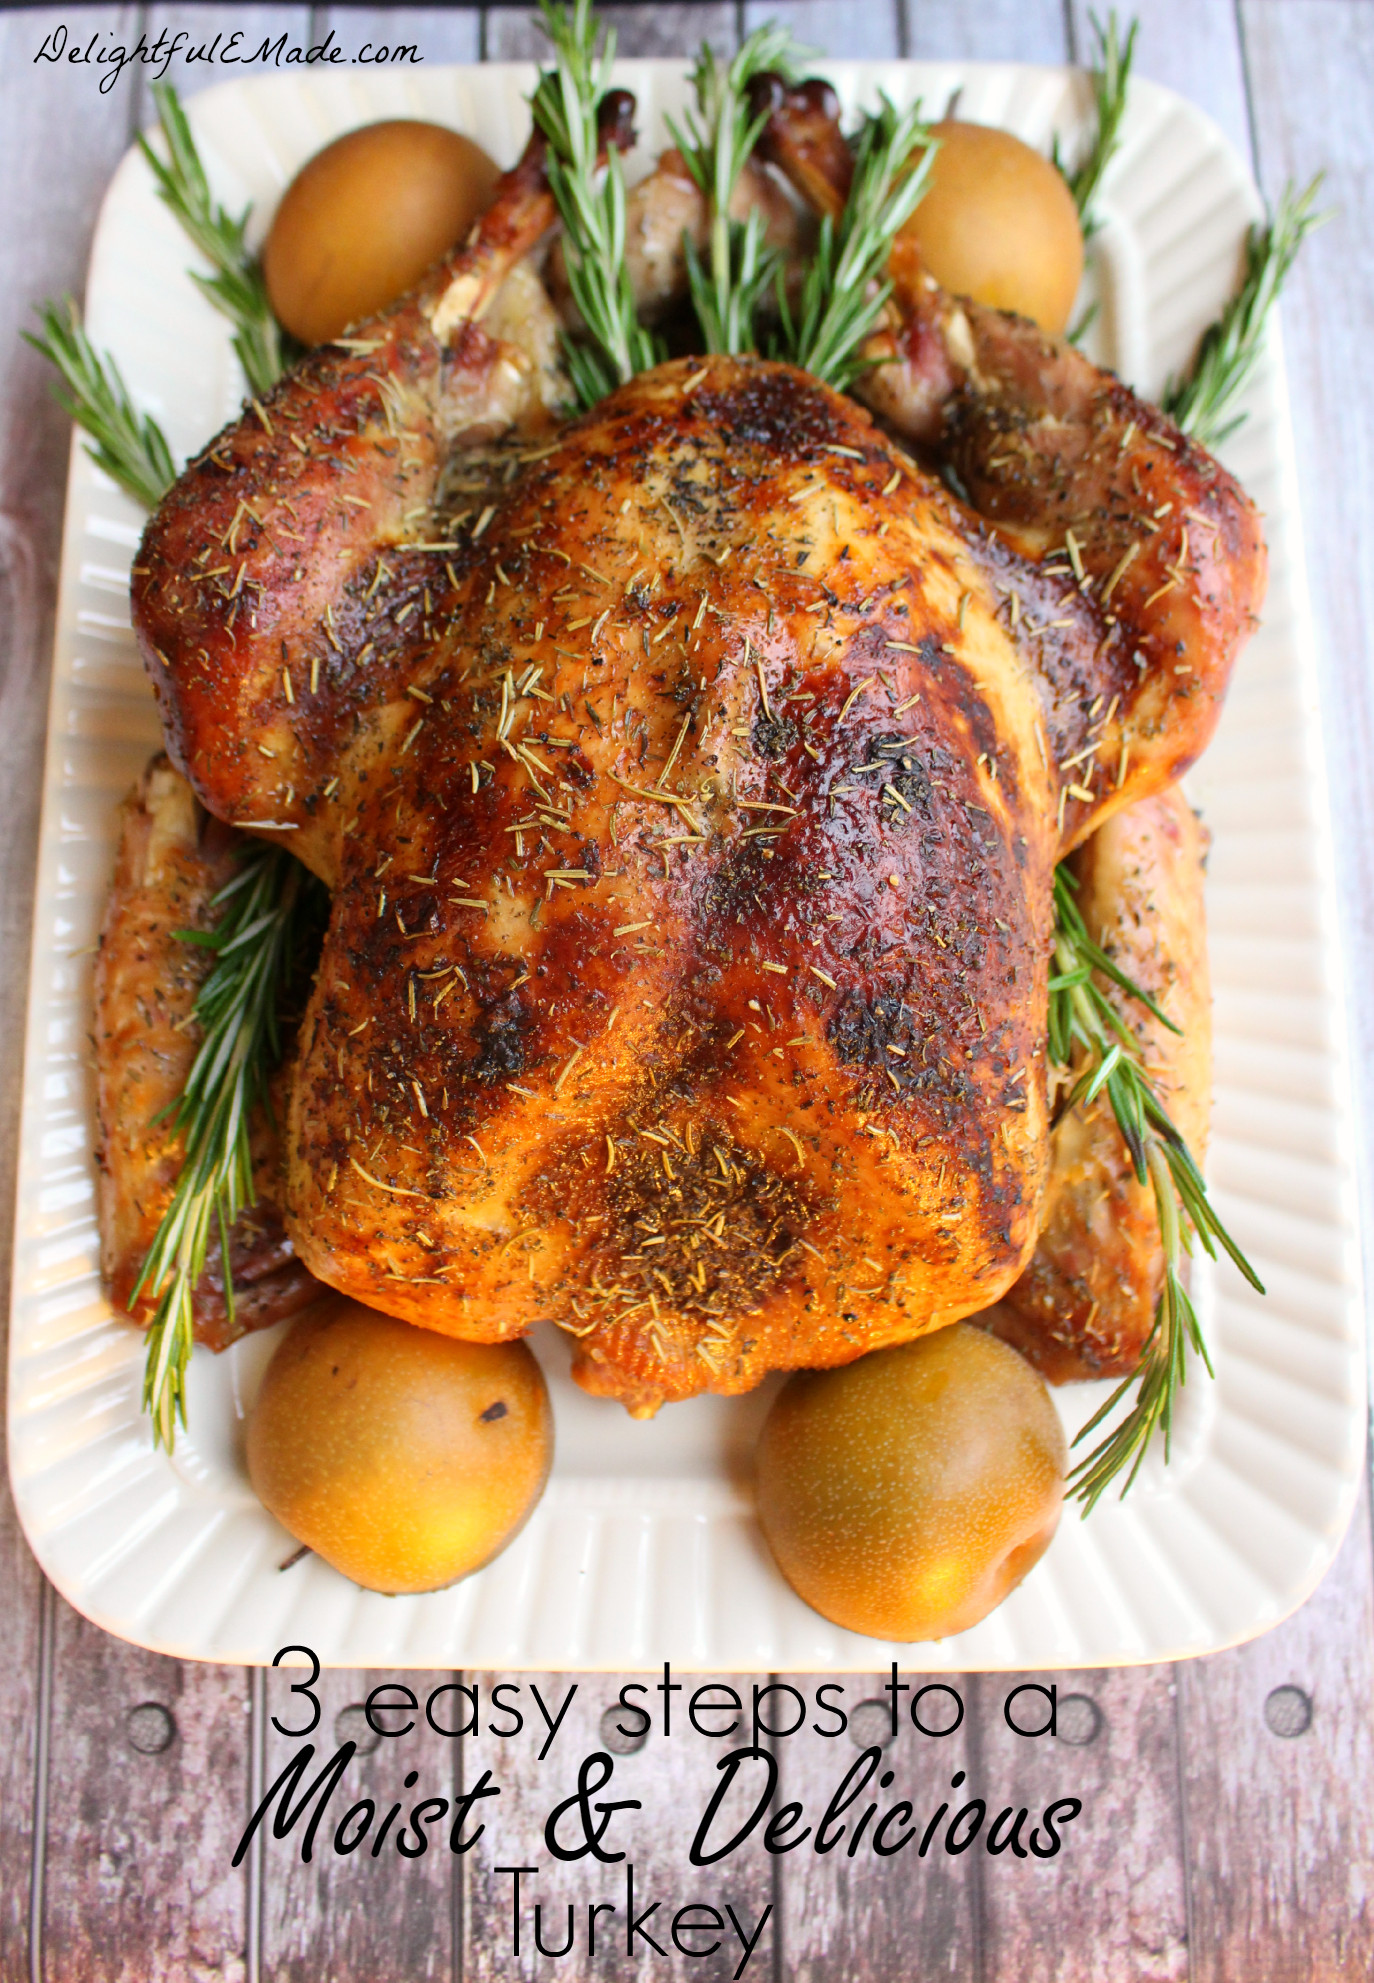 Delicious Turkey Recipes For Thanksgiving
 3 Easy Steps to a Moist and Delicious Turkey Delightful